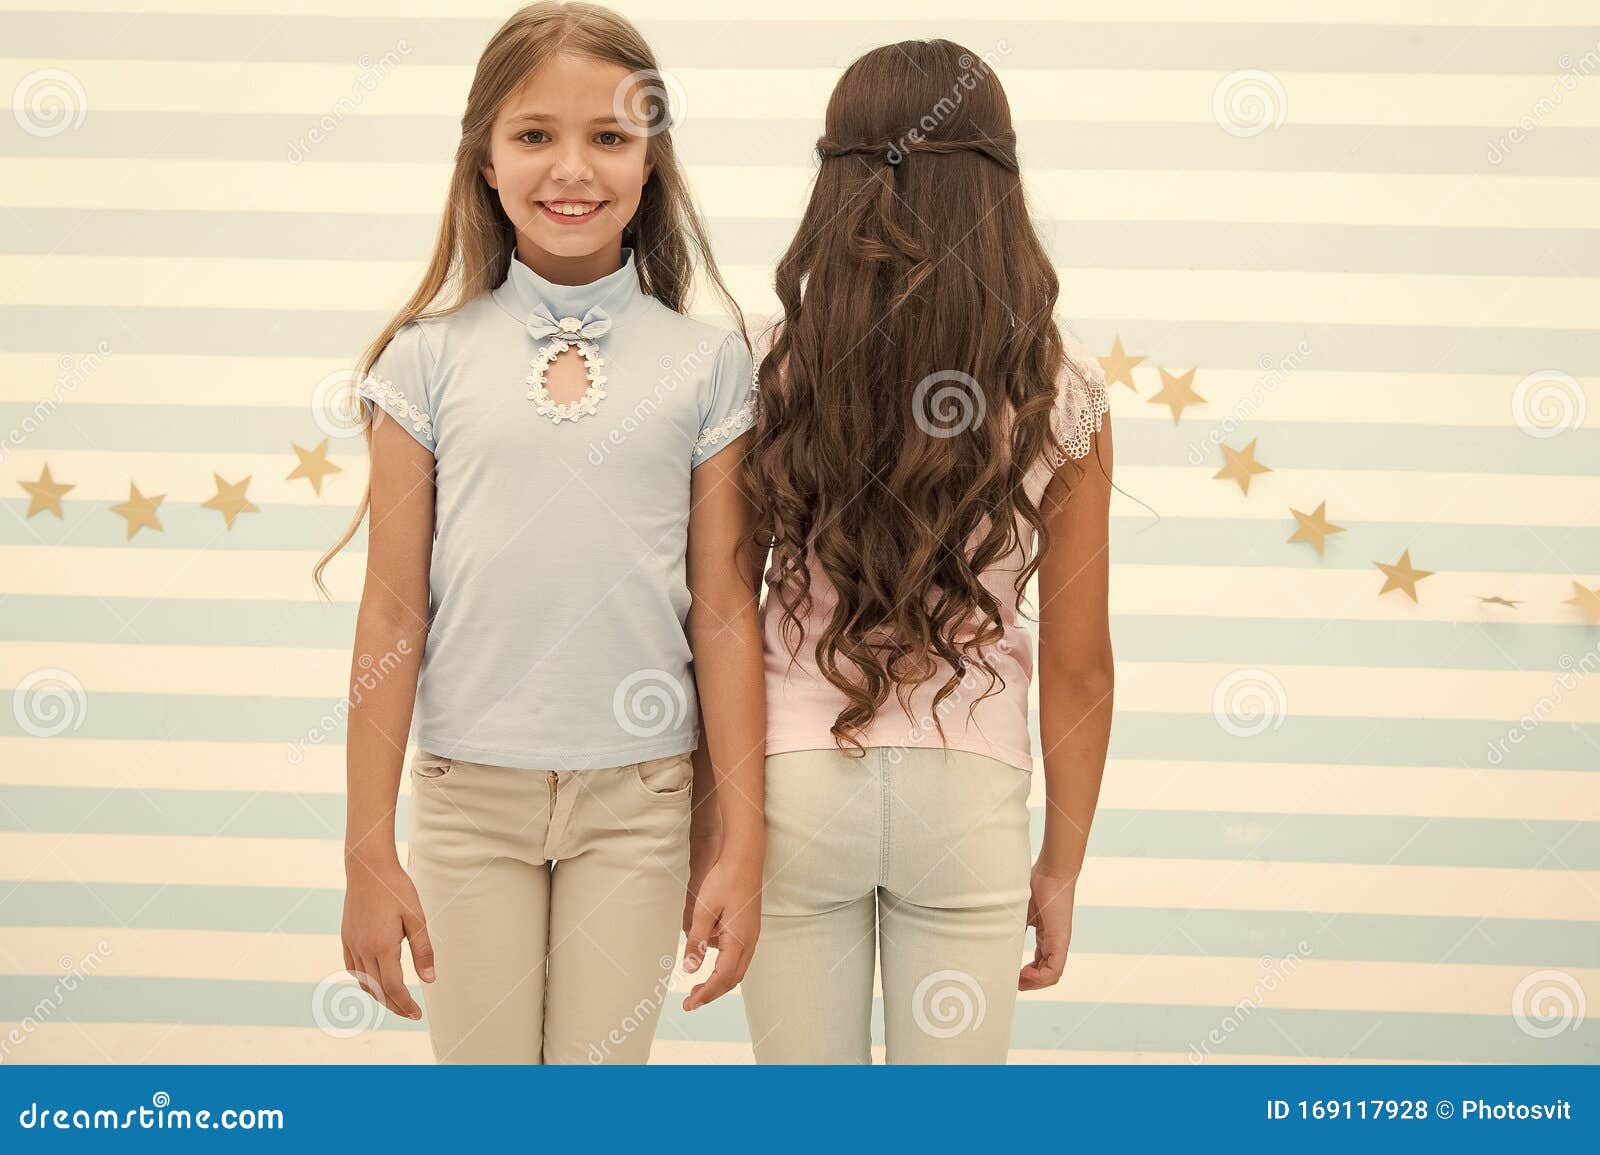 Small Girls with Long Curly Hair. Healthy Hair. Shampoo Conditioner Balm  and Mask. Curling Styling Stock Photo - Image of friends, fashion: 169117928